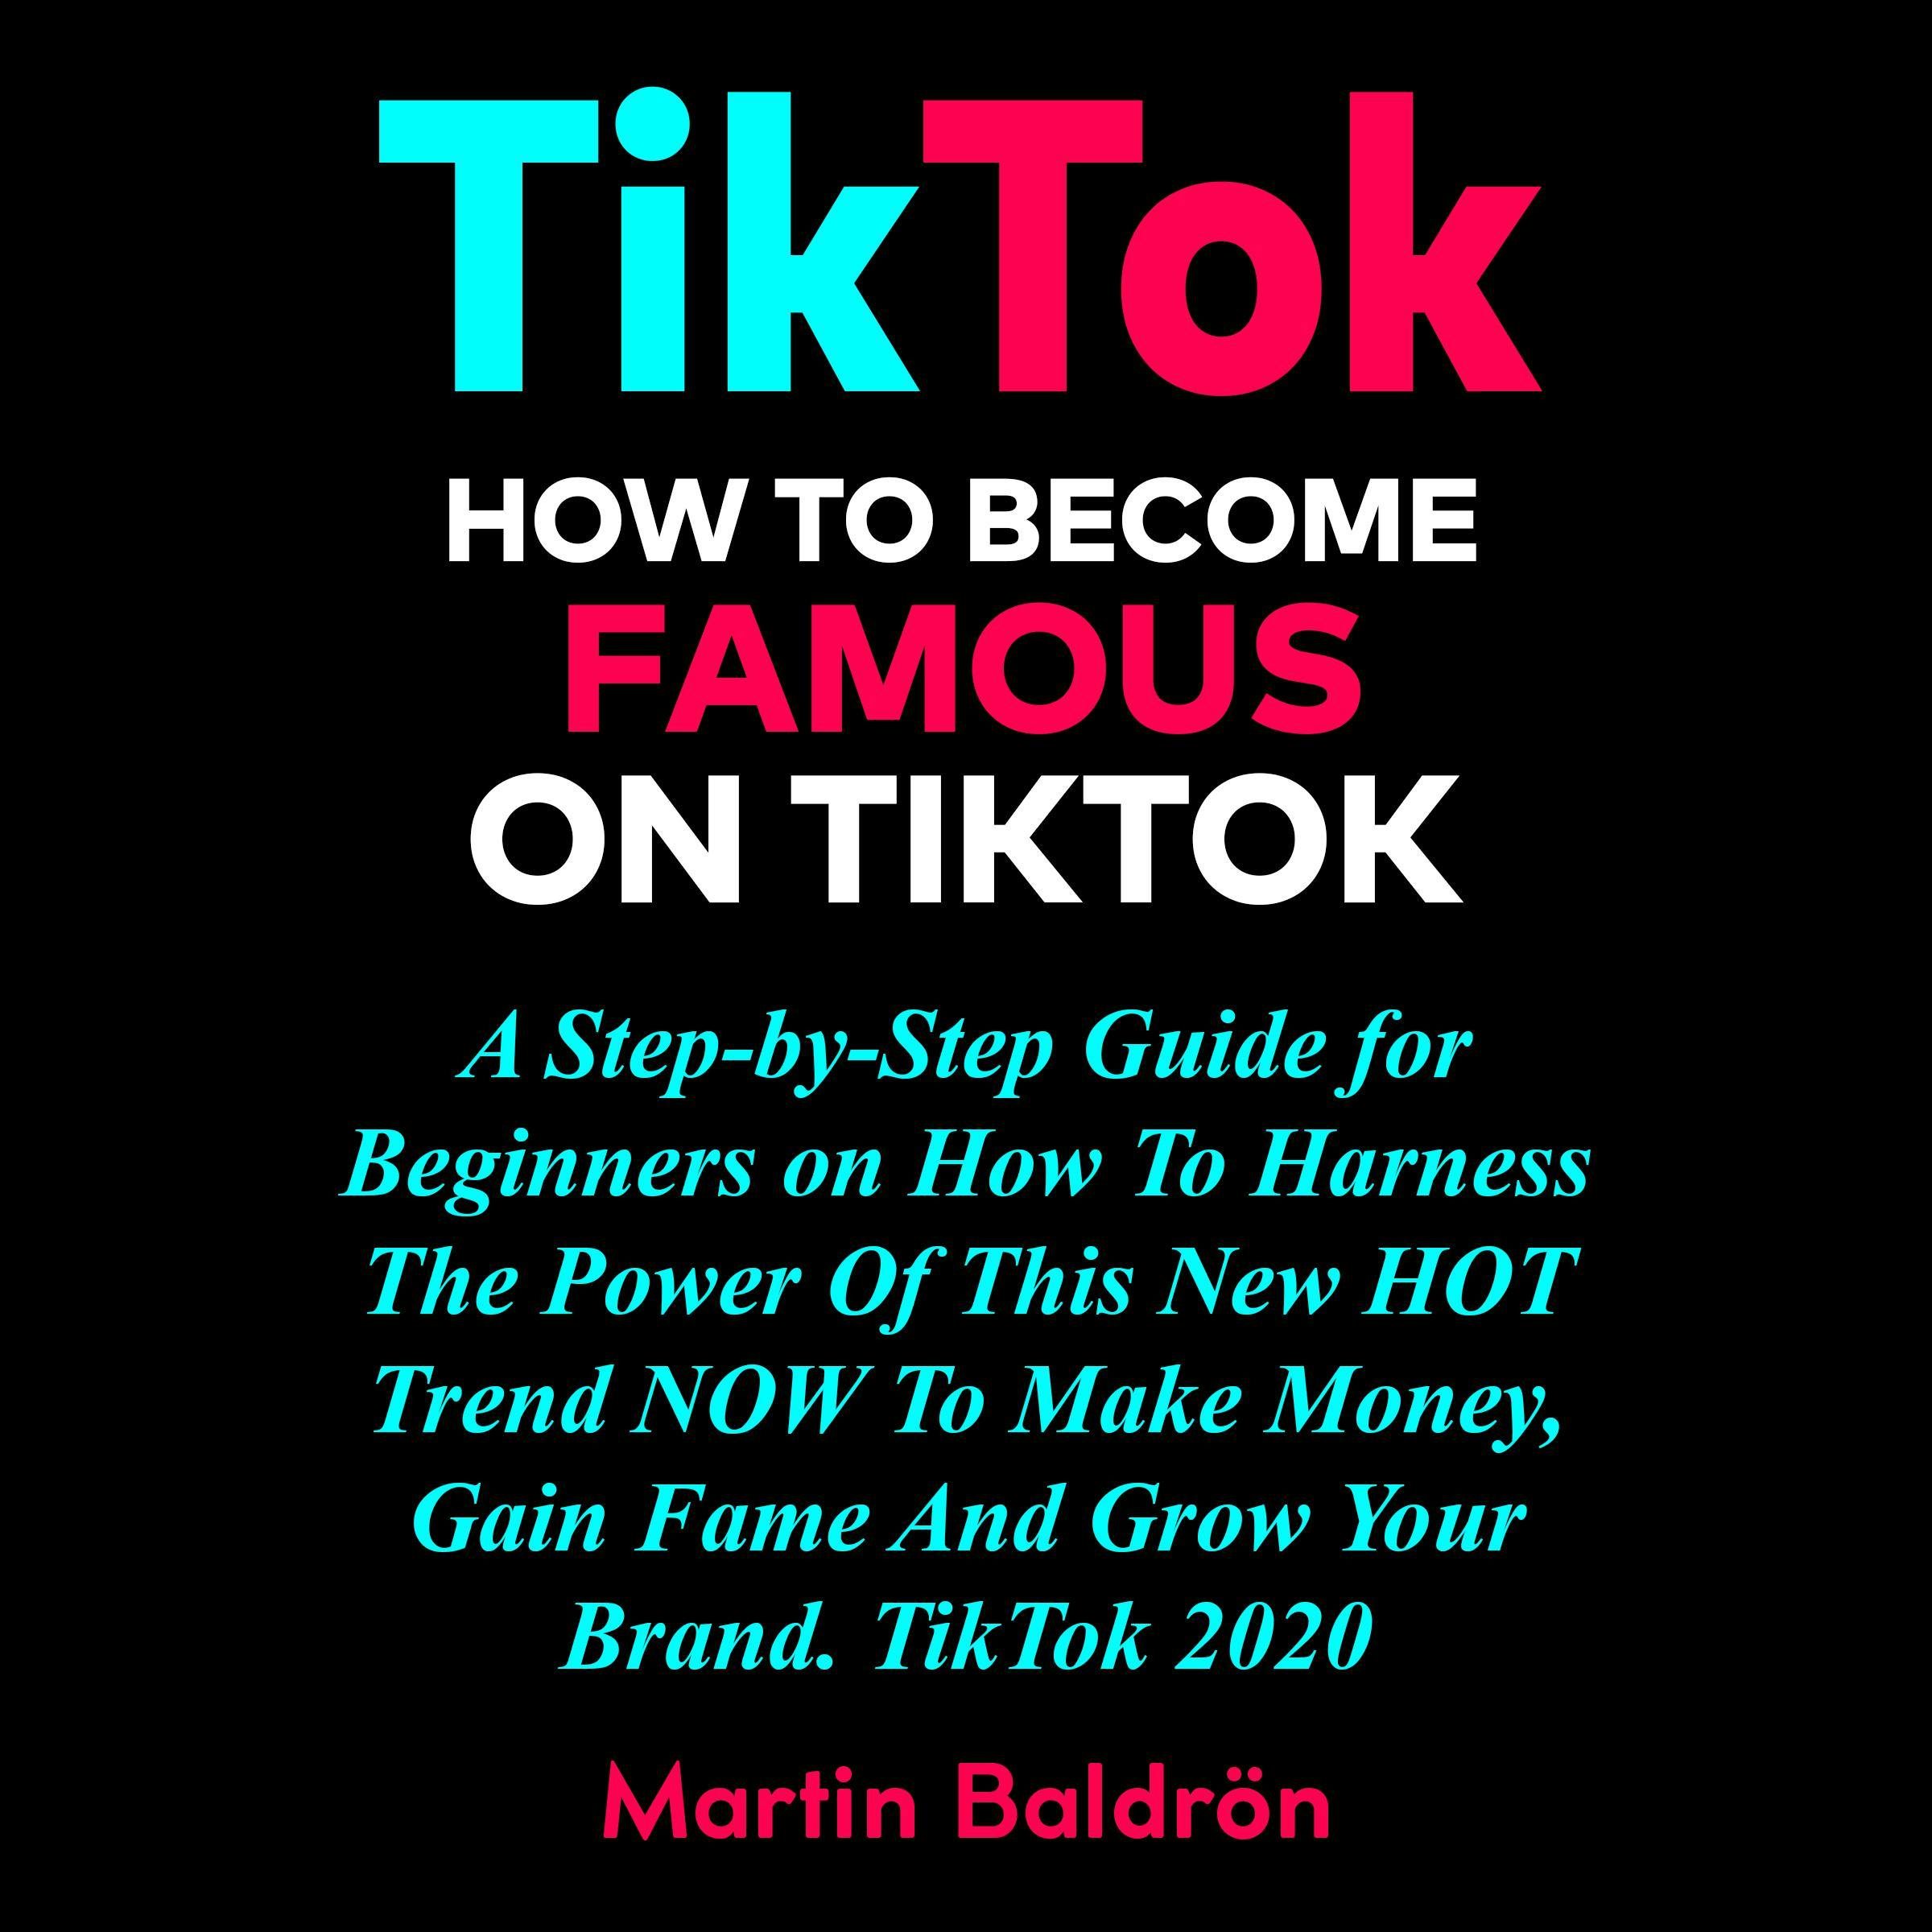 TikTok: How to Become Famous on Tik Tok: A Step-by-Step Guide for Beginners on How to Harness the Power of This New Hot Trend to Make Money, Gain Fame and grow Your Brand – TikTok 2020. - undefined